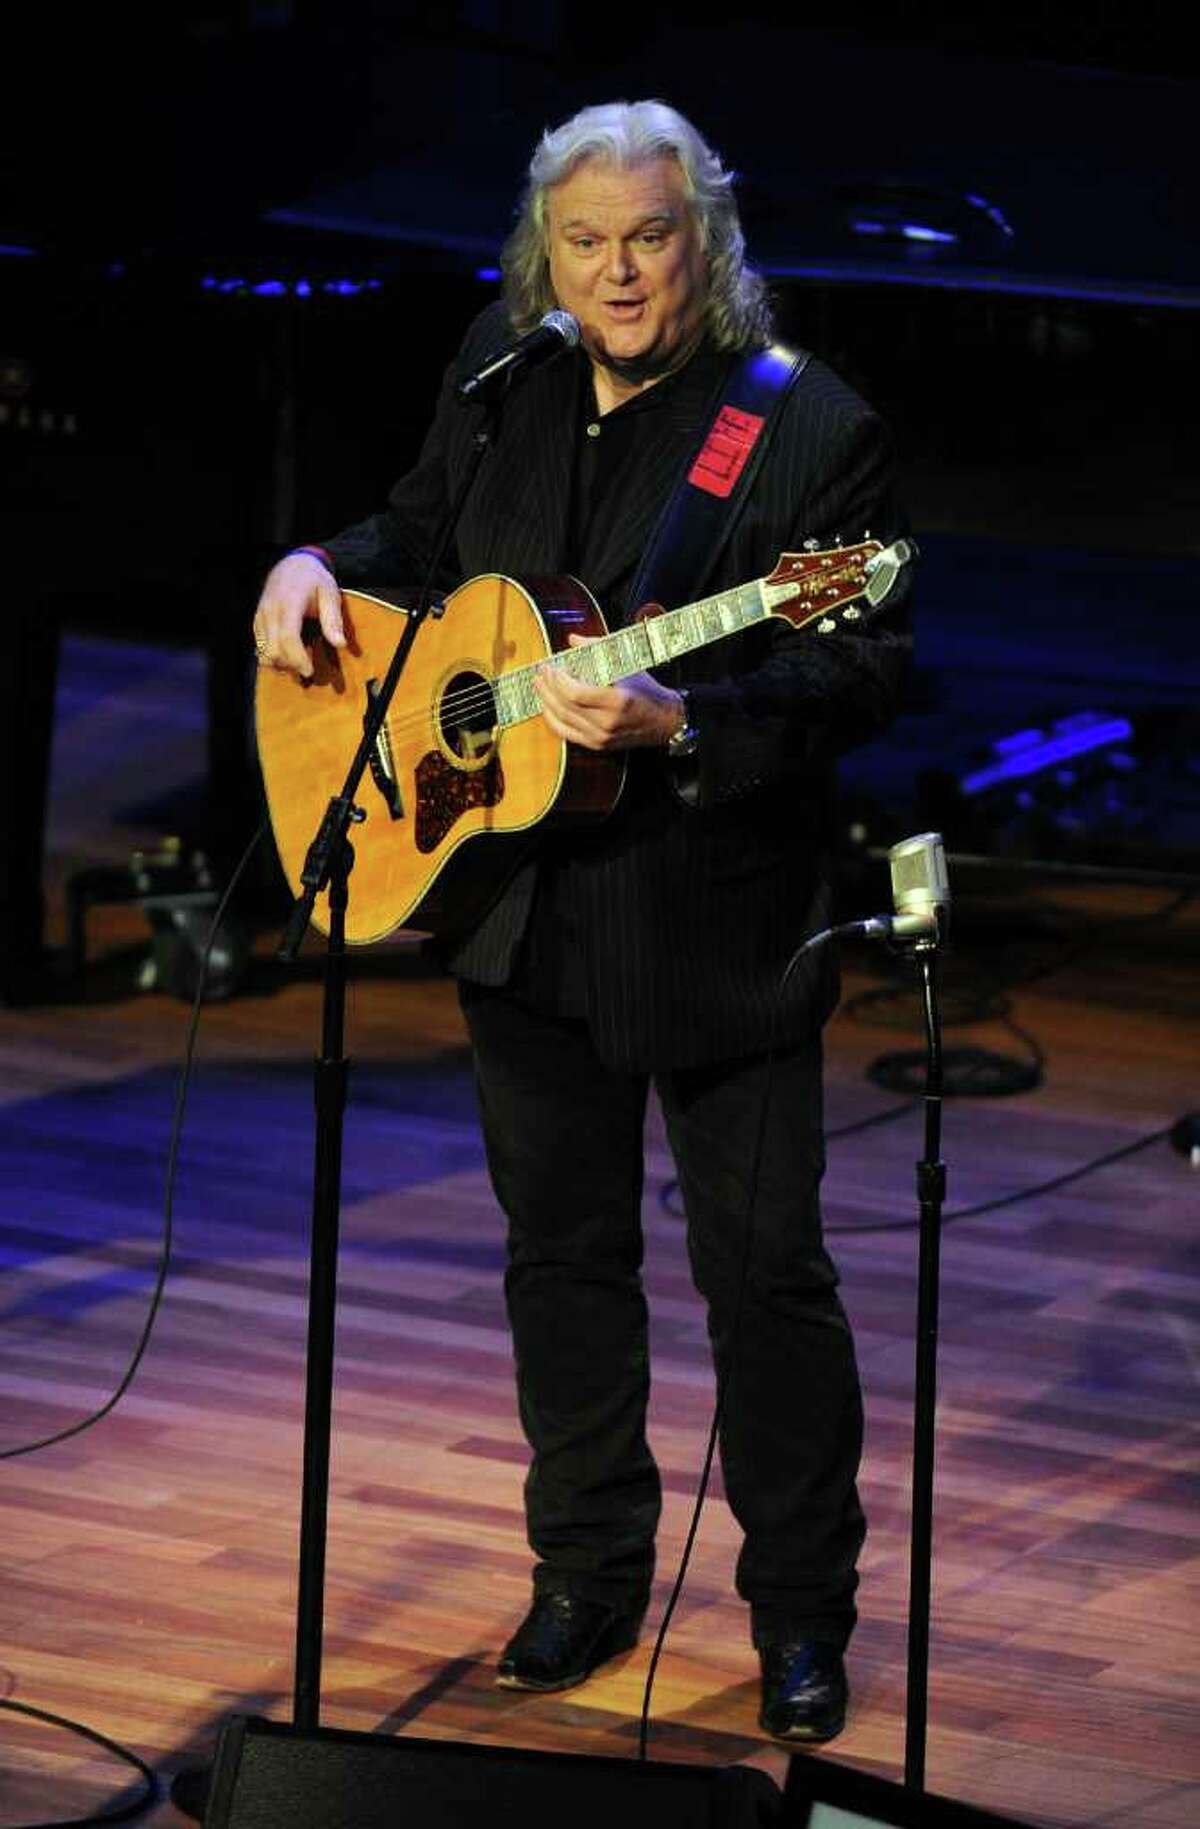 Ricky Skaggs talks about his friend Earl Scruggs during Scrugg's funeral service at the Ryman Auditorium on Sunday, April 1, 2012, in Nashville, Tenn. Scruggs died Wednesday, March 28, 2012. He was 88. (AP Photo/Joe Howell, Pool)